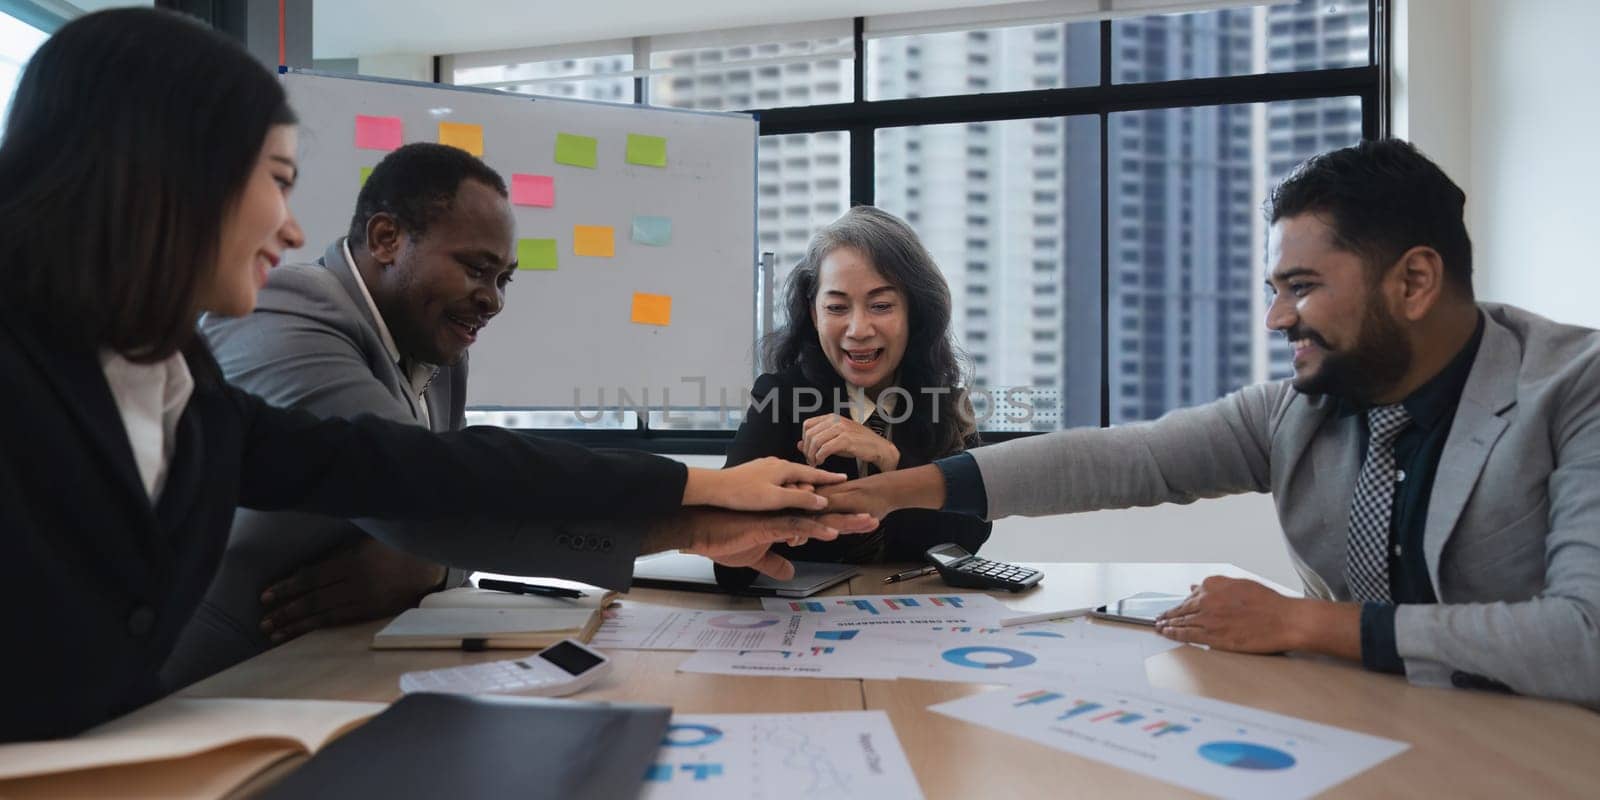 Business people diversity ethnicity stack touch arms palms together celebrating promotion reward, succeed common aim. Give high five symbol of unity by nateemee